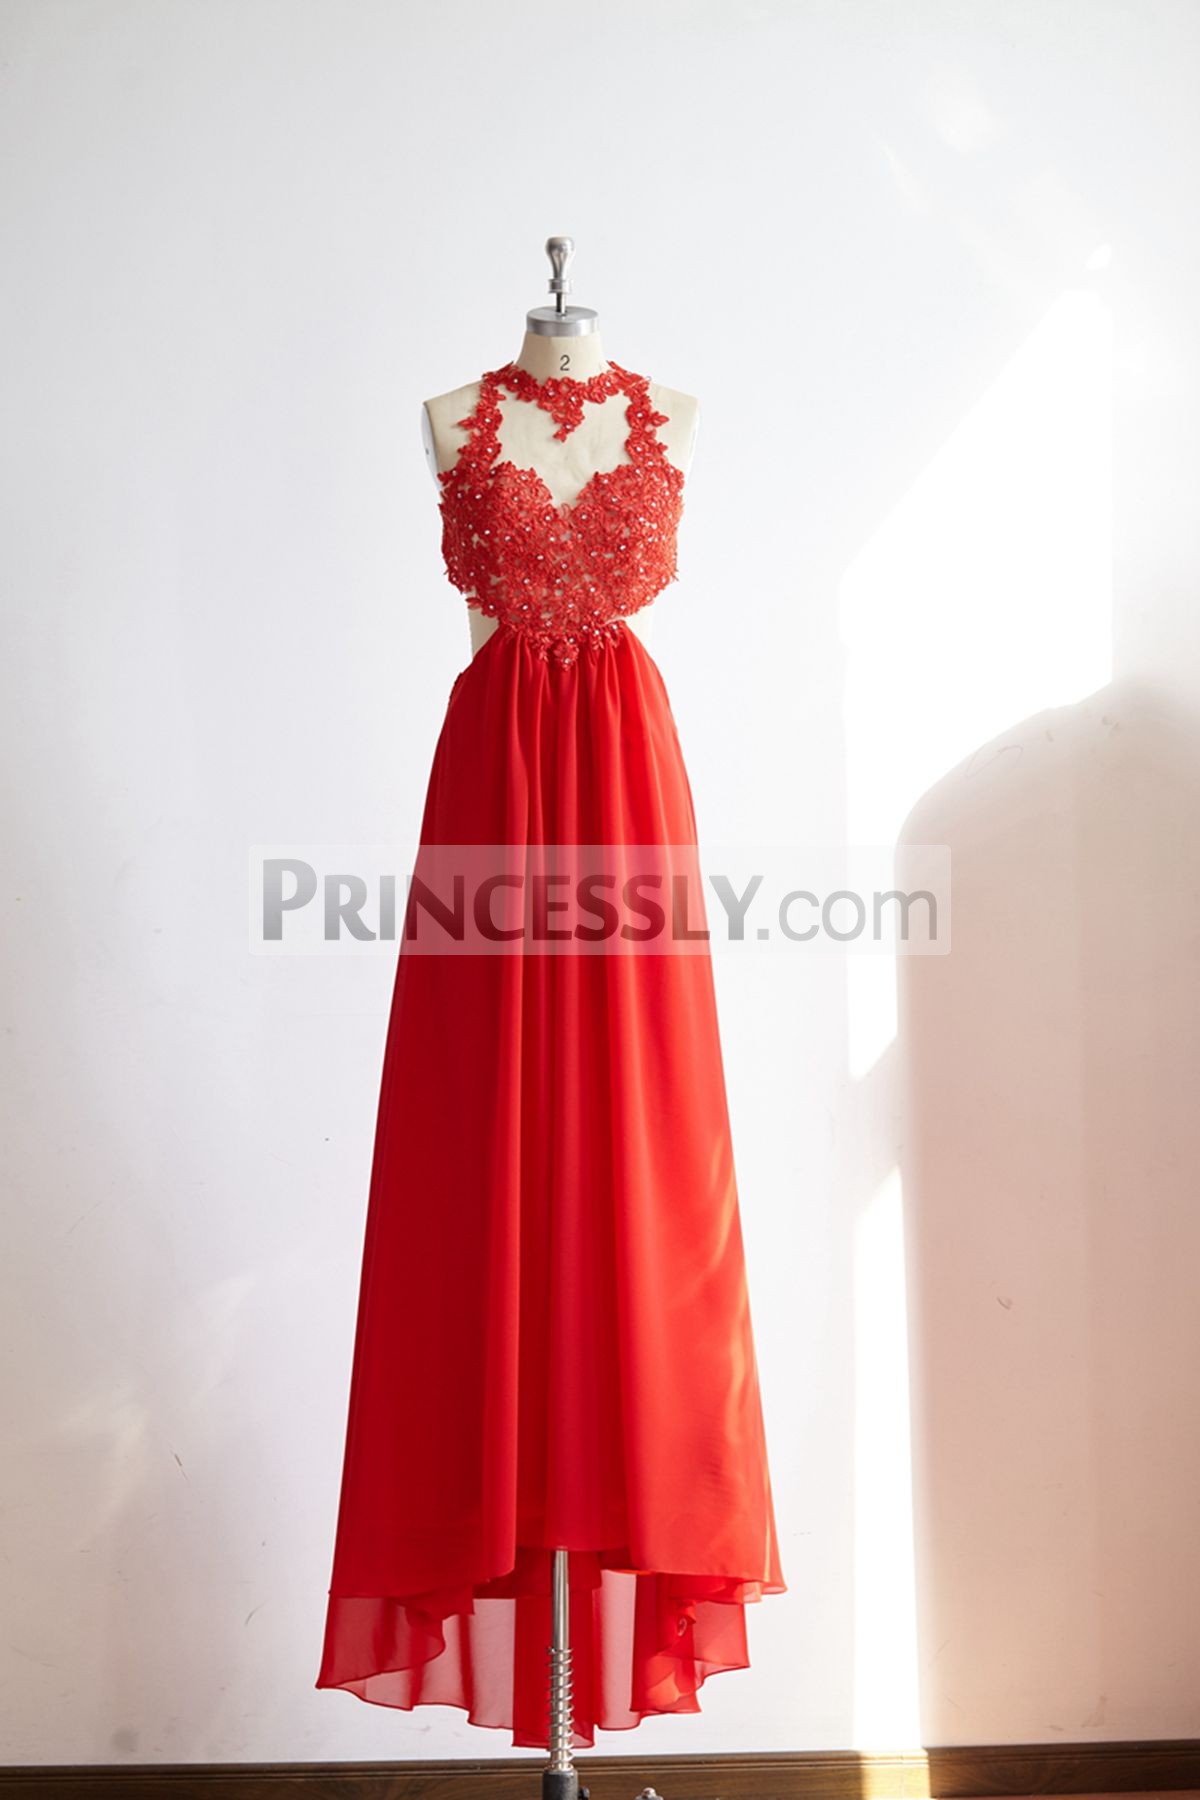 Princessly.com-K1000321-Sexy See Through Backless Red Lace Chiffon Prom Party Dress-31